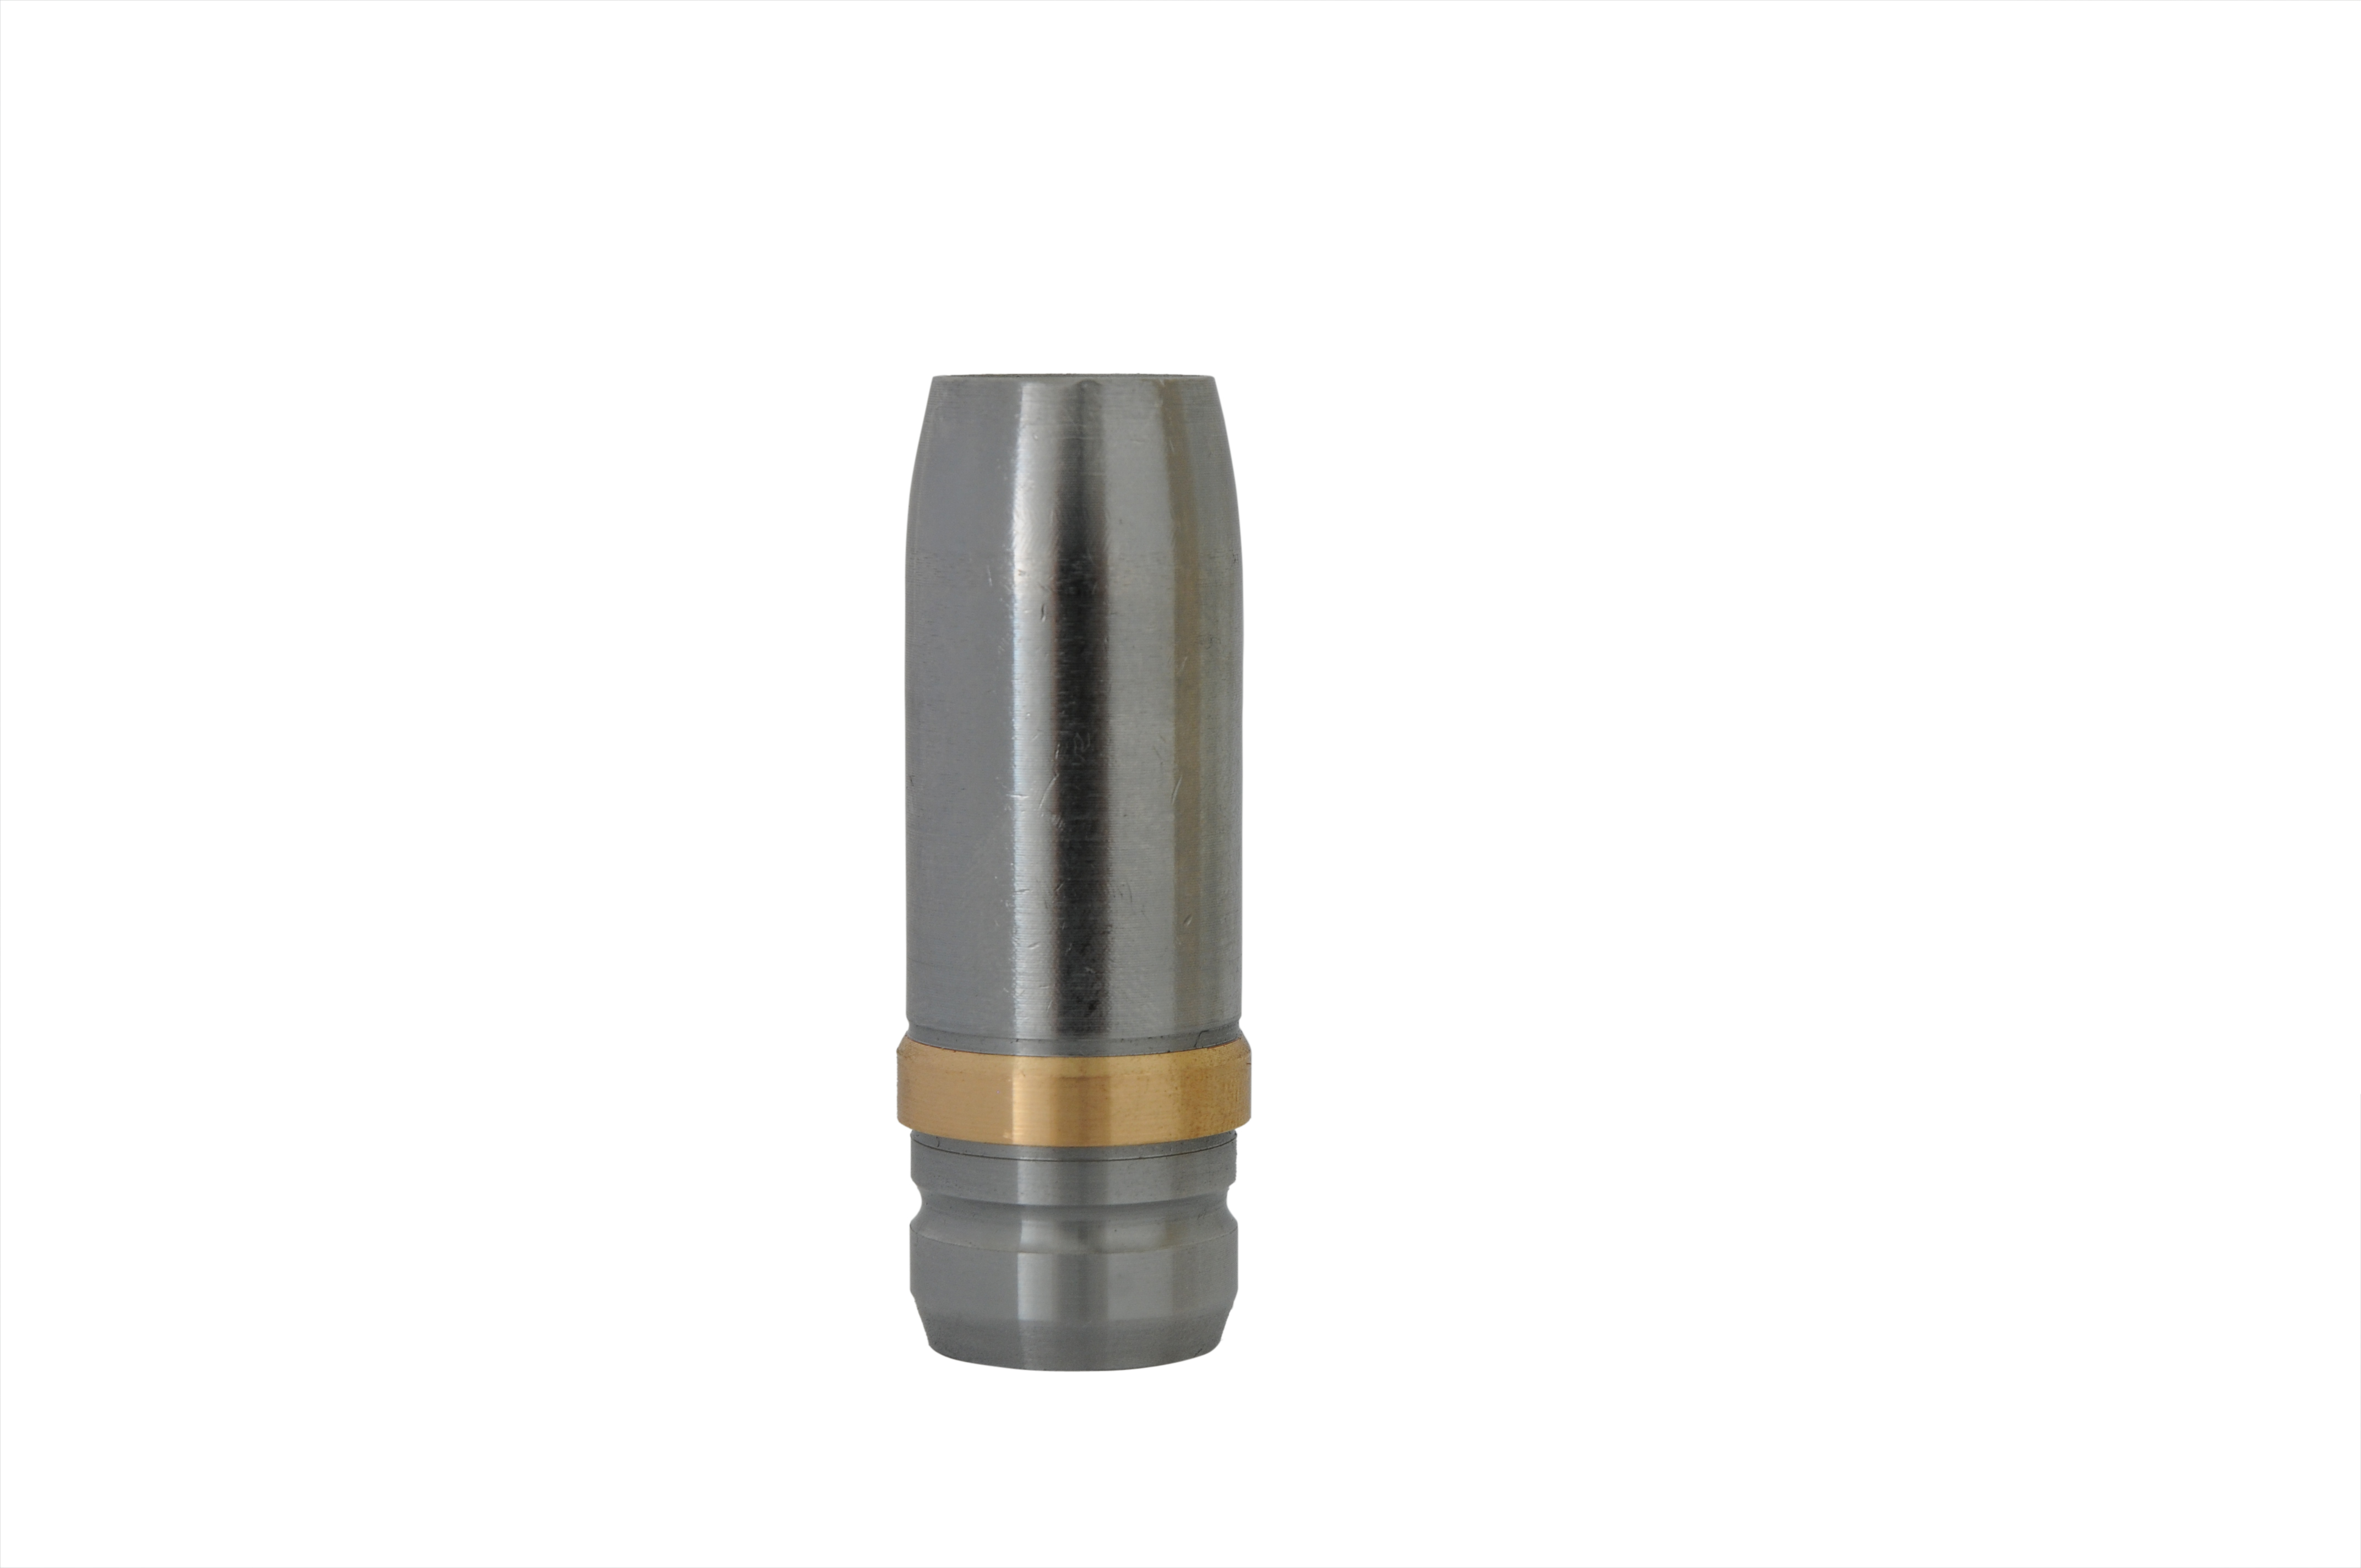 20 mm M56 Projectile Body/Base